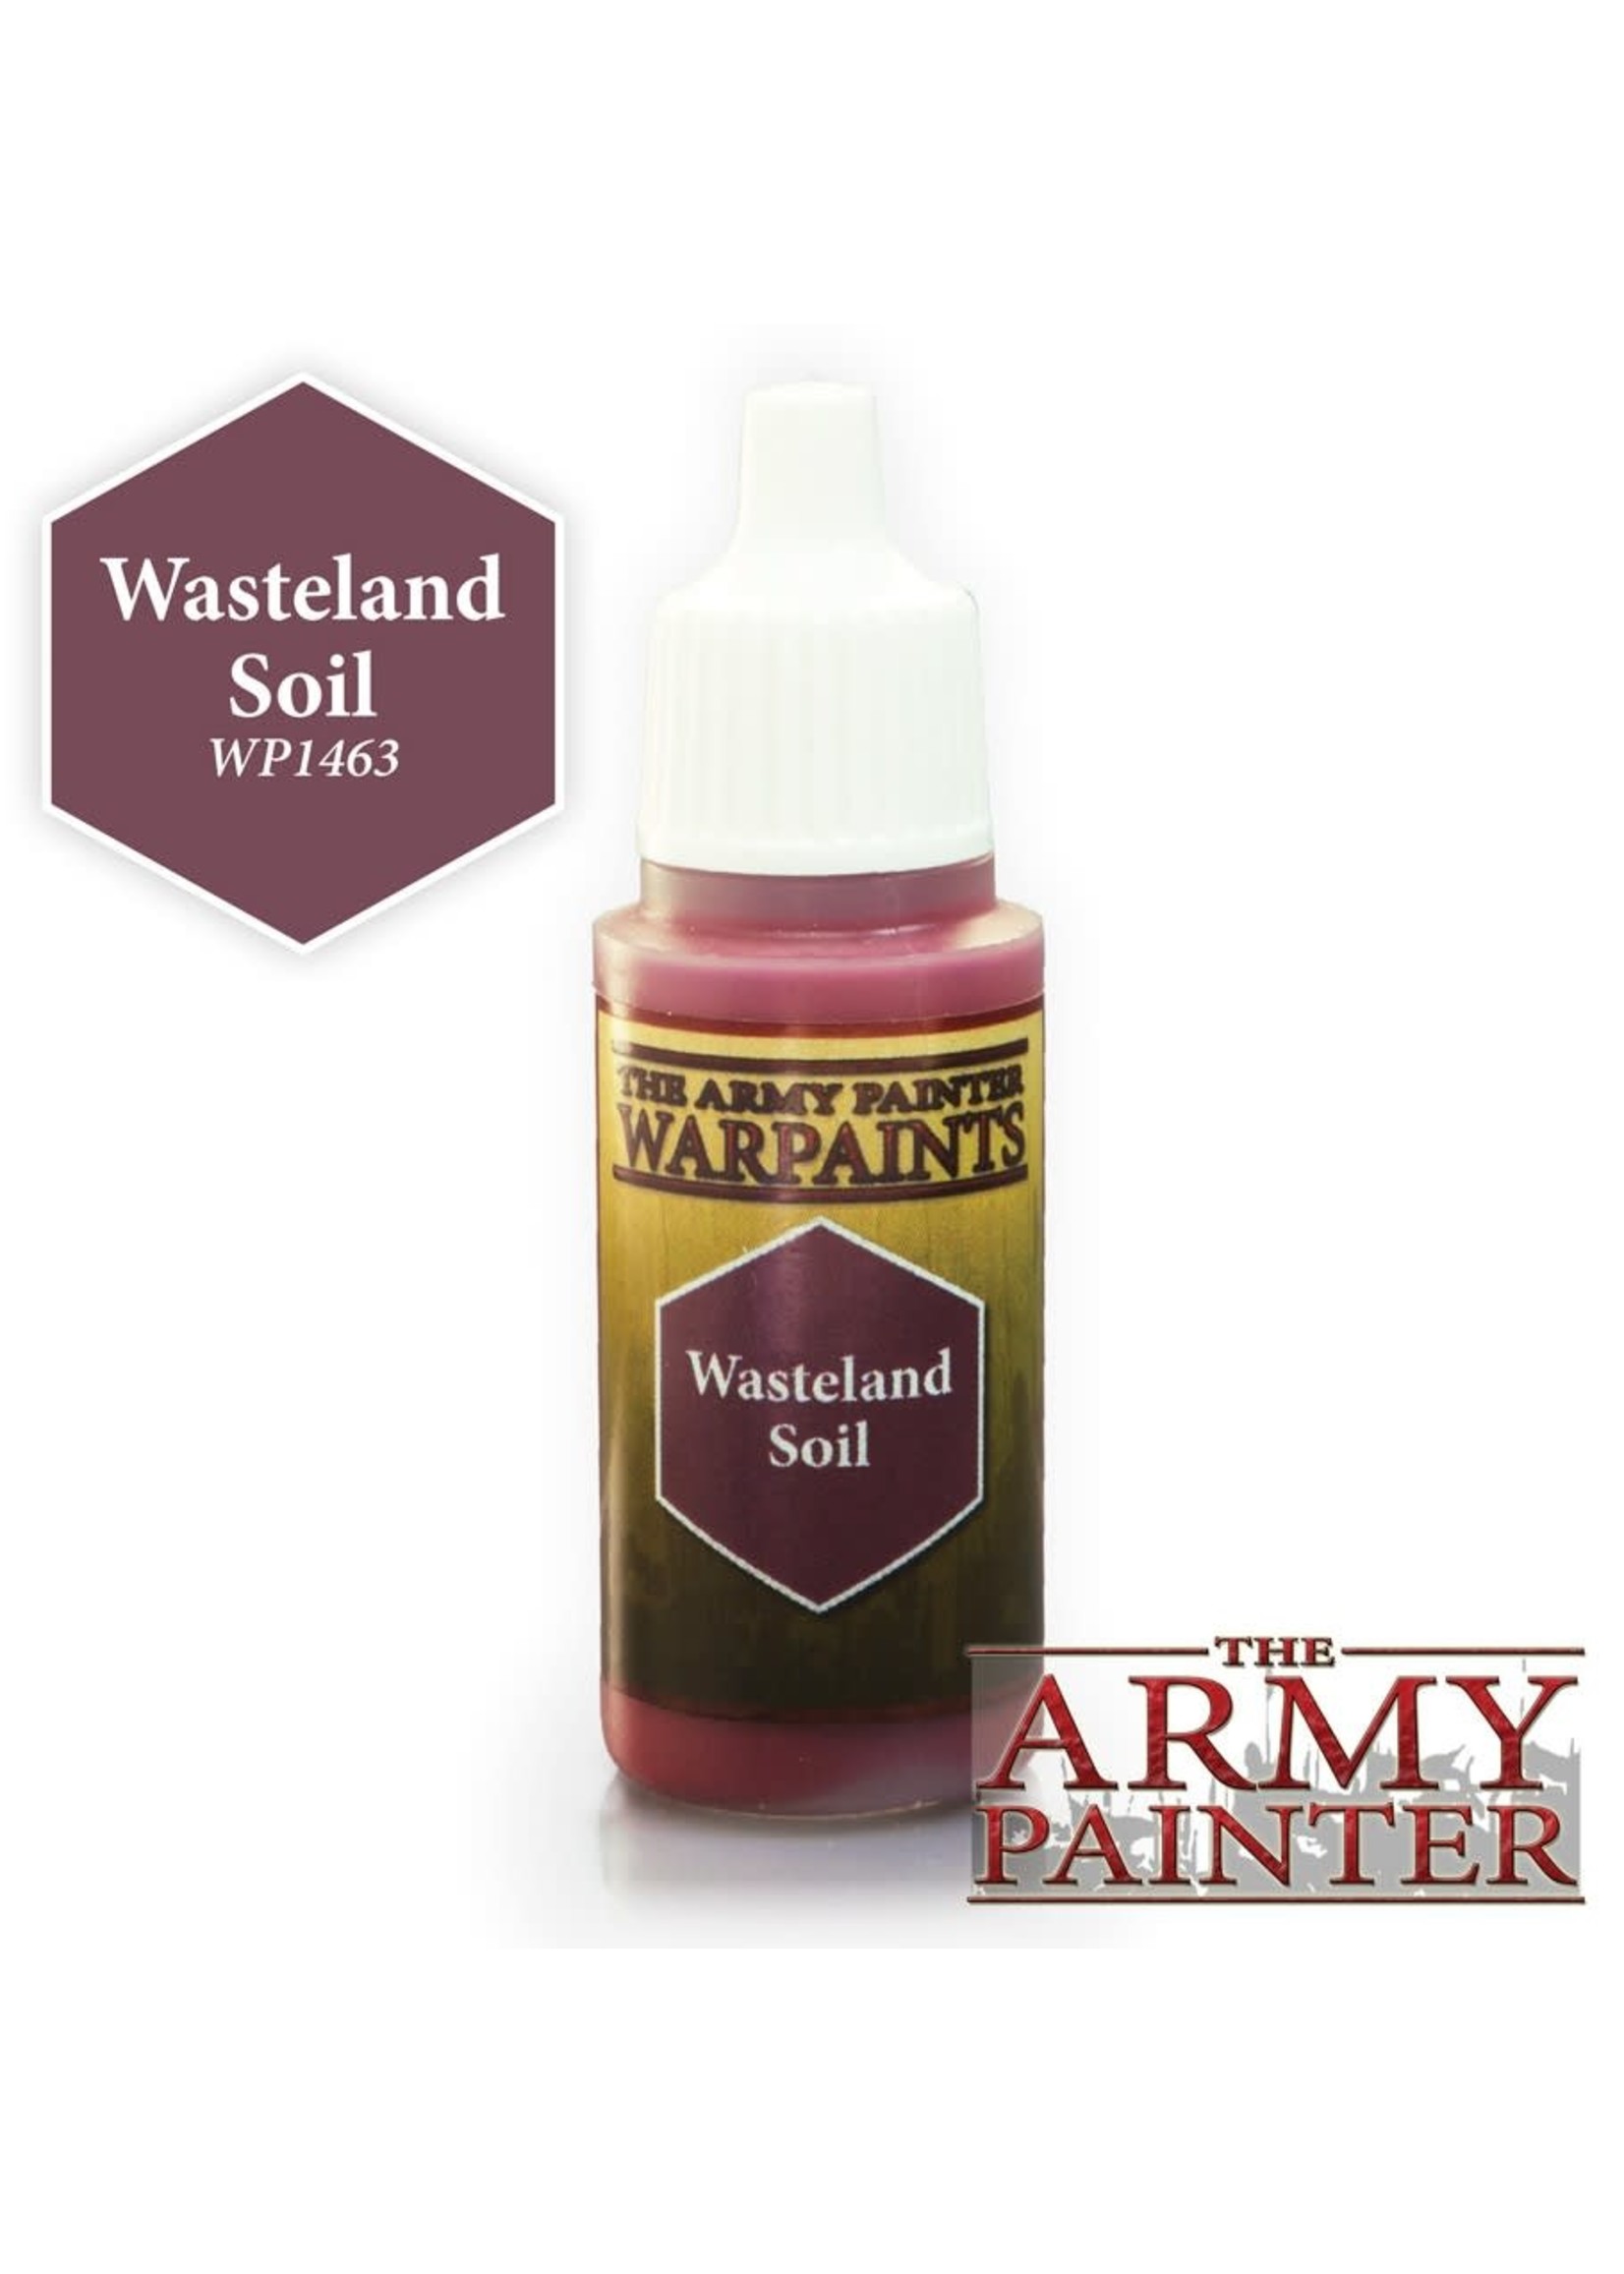 The Army Painter Acrylics Warpaints Wasteland Soil